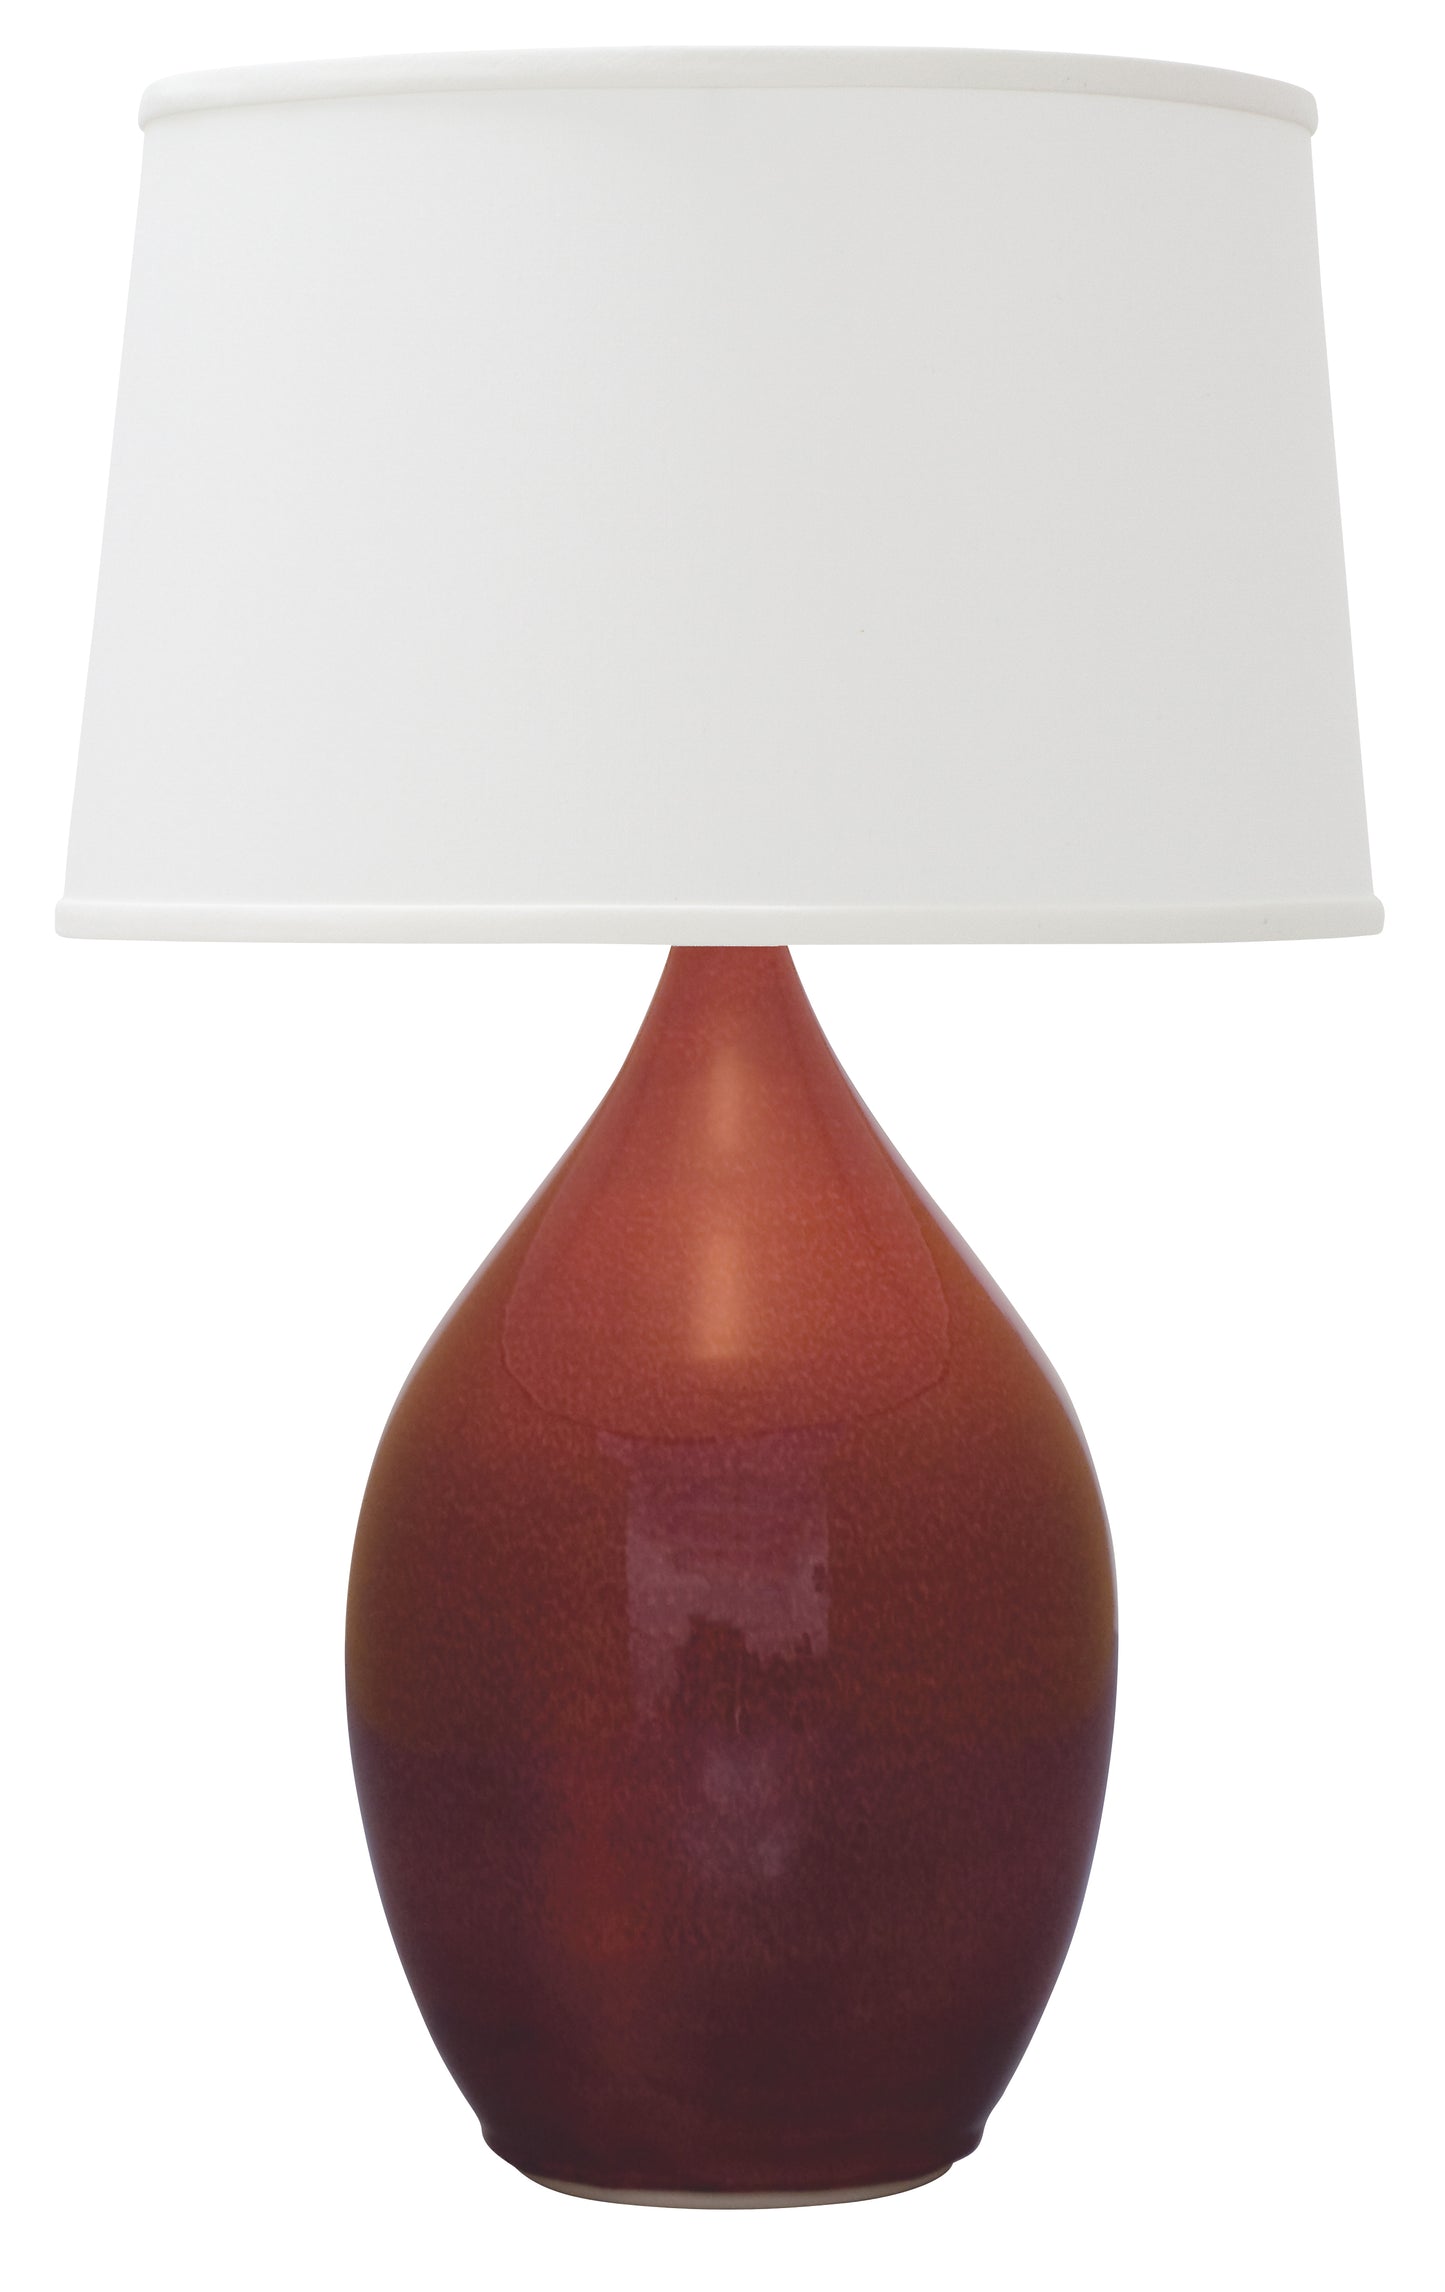 House of Troy Scatchard 24.5" Stoneware Table Lamp in Copper Red GS402-CR